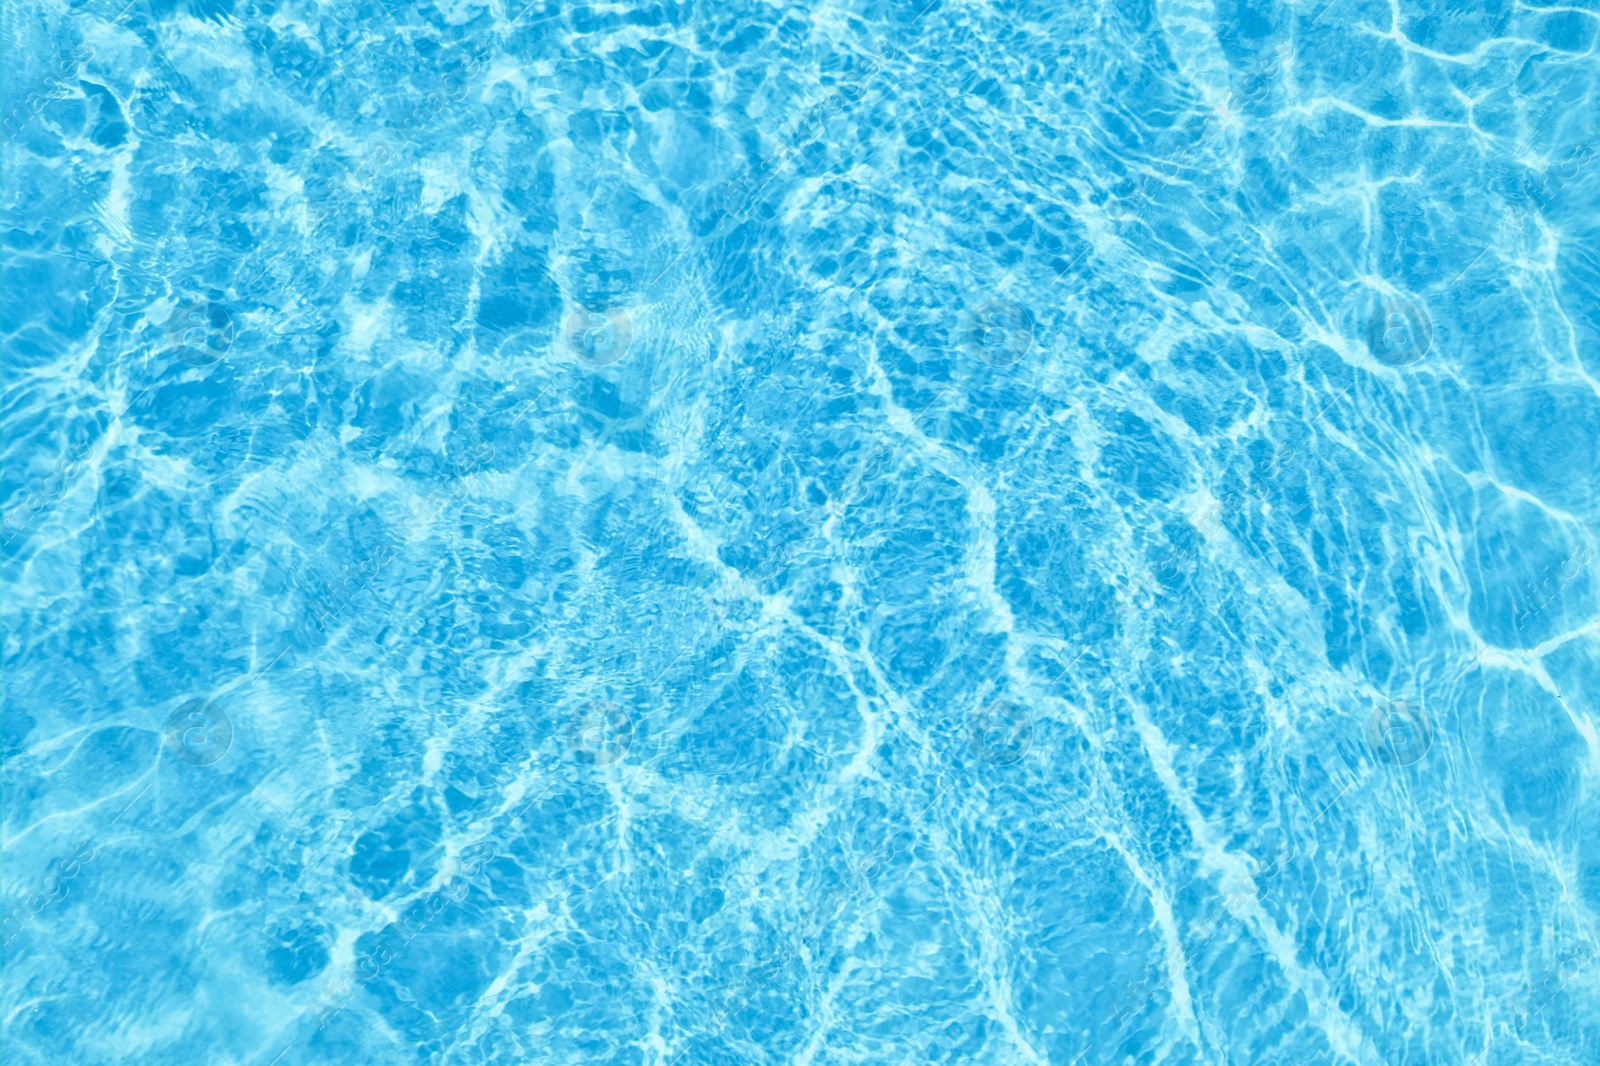 Image of Swimming pool with cool water as background, top view